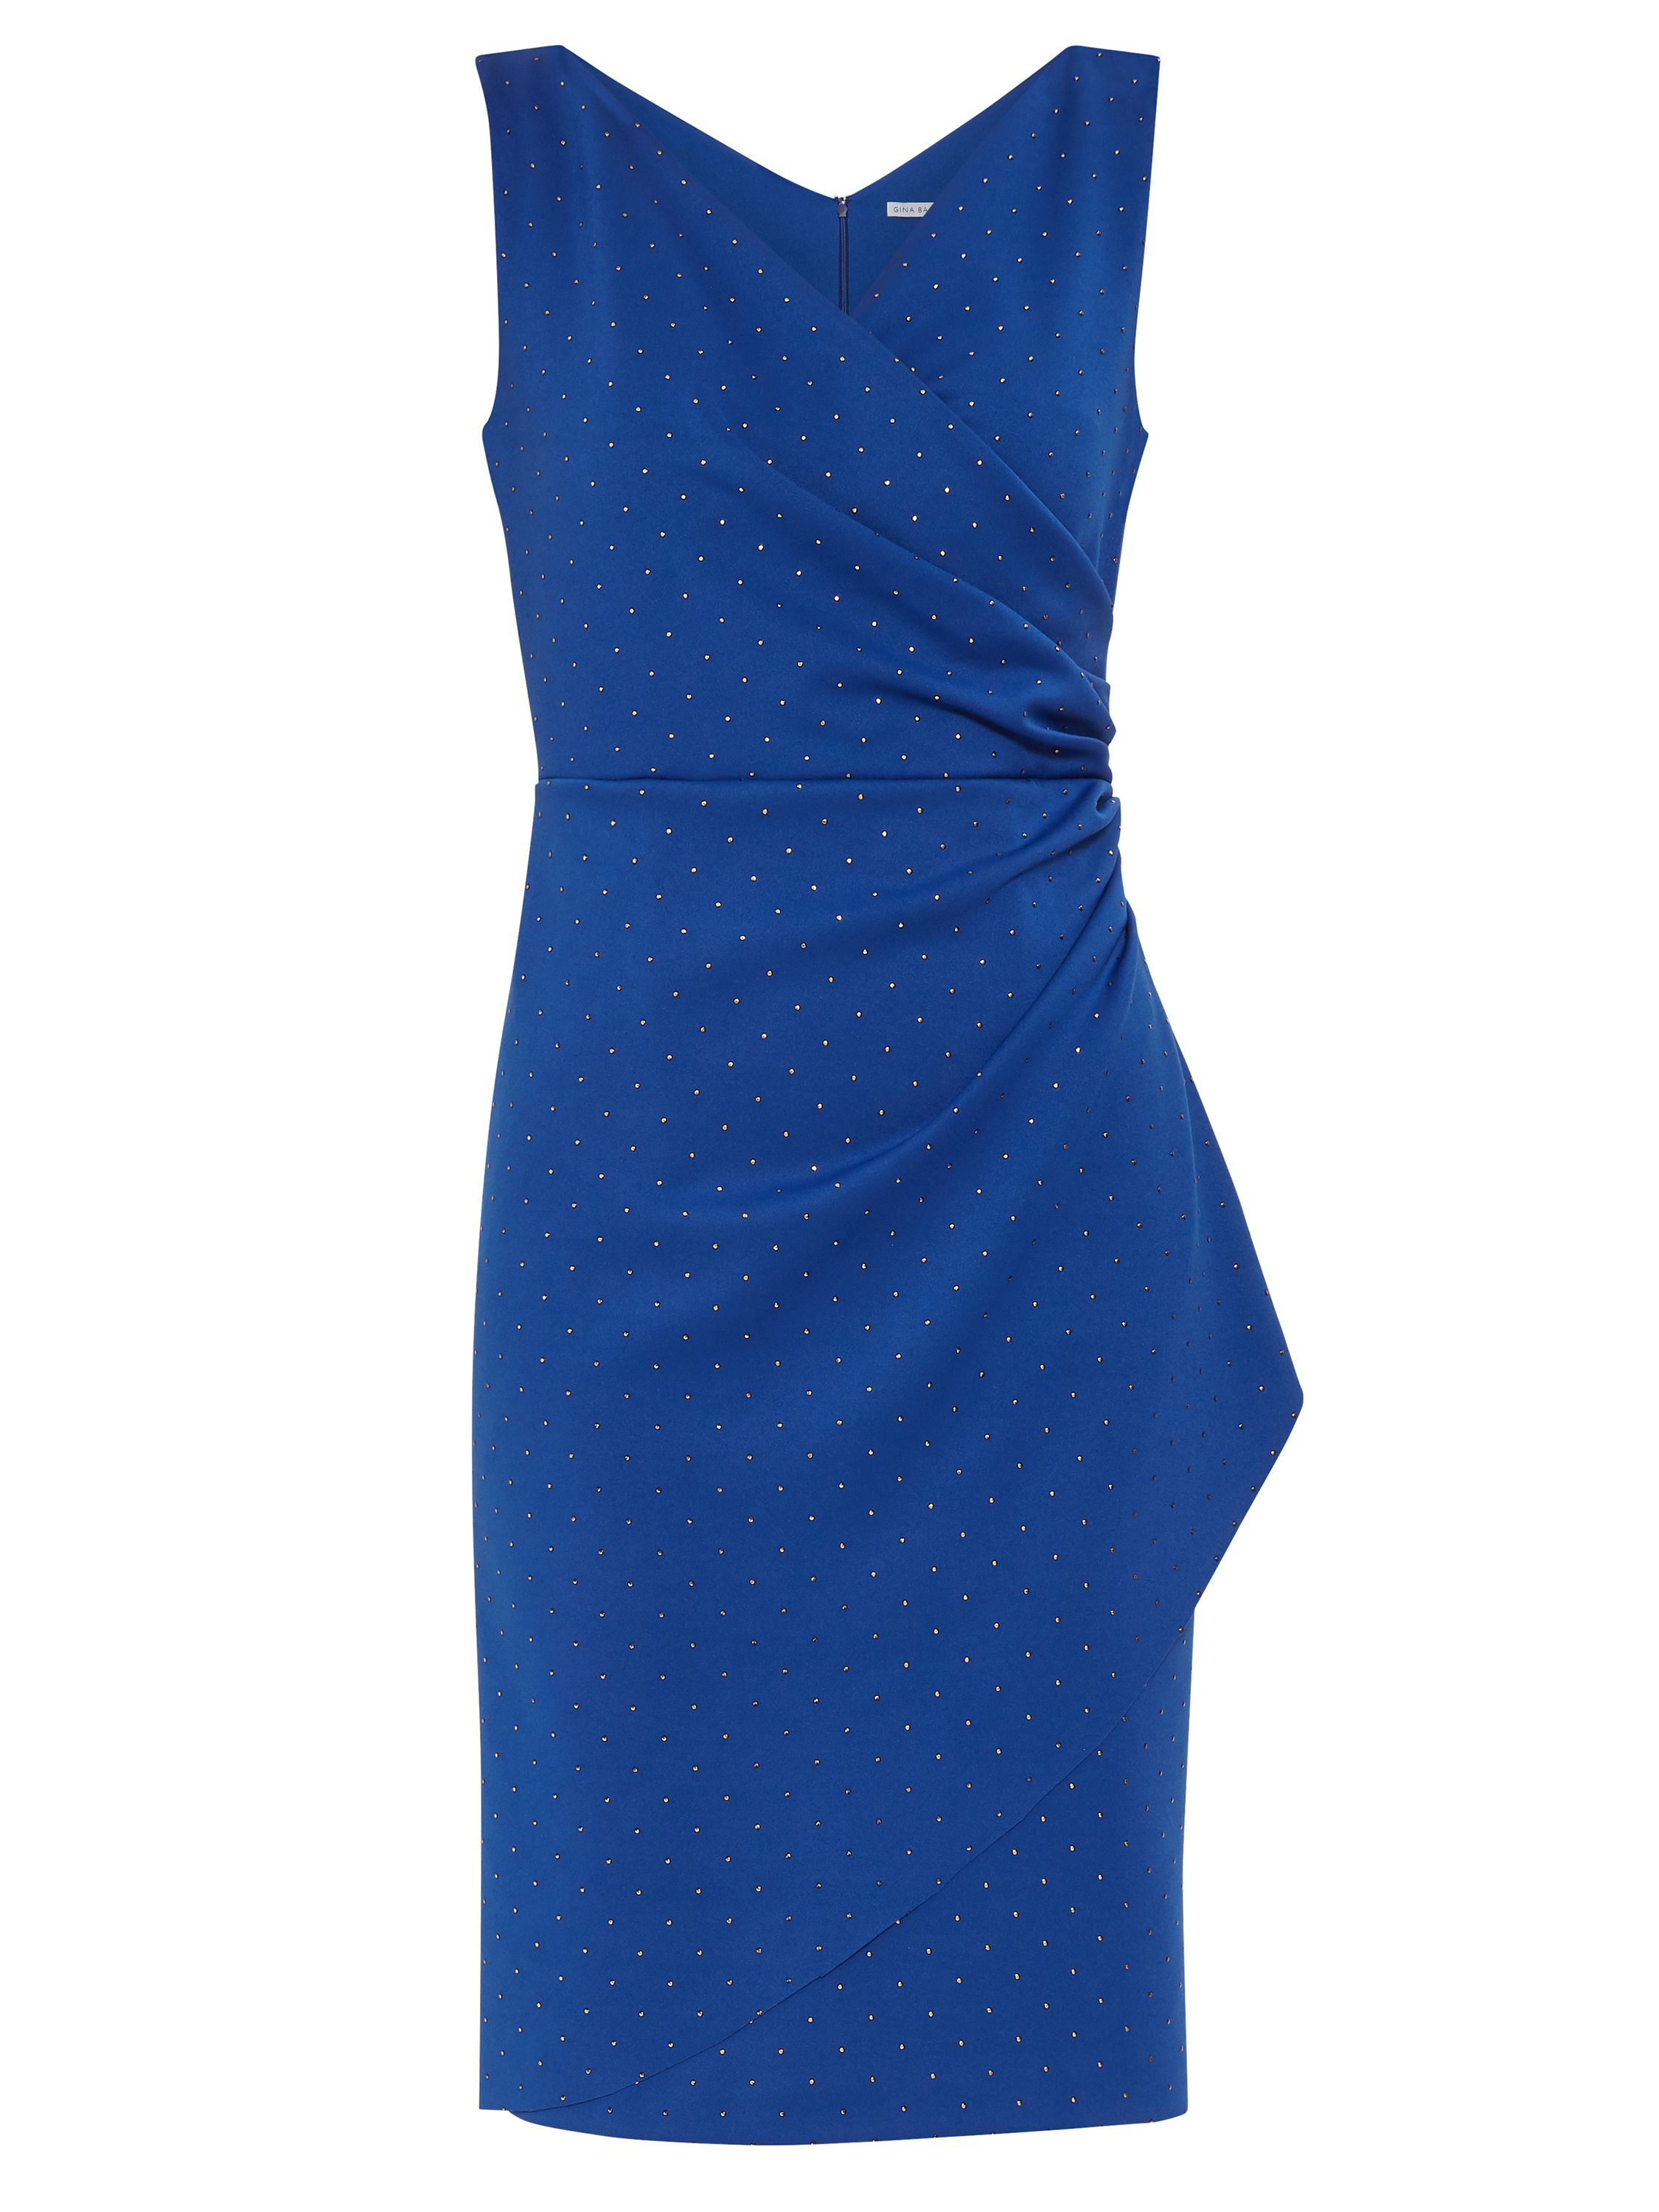 Feel gorgeous in this elegant stretch stud scuba dress by Gina Bacconi. A wrap style dress with split hem makes for a classic and flattering silhouette. Also featuring a ruched waist, finished with sultry deep v neck. The lightweight stretch scuba is perfect for evening and occasion.